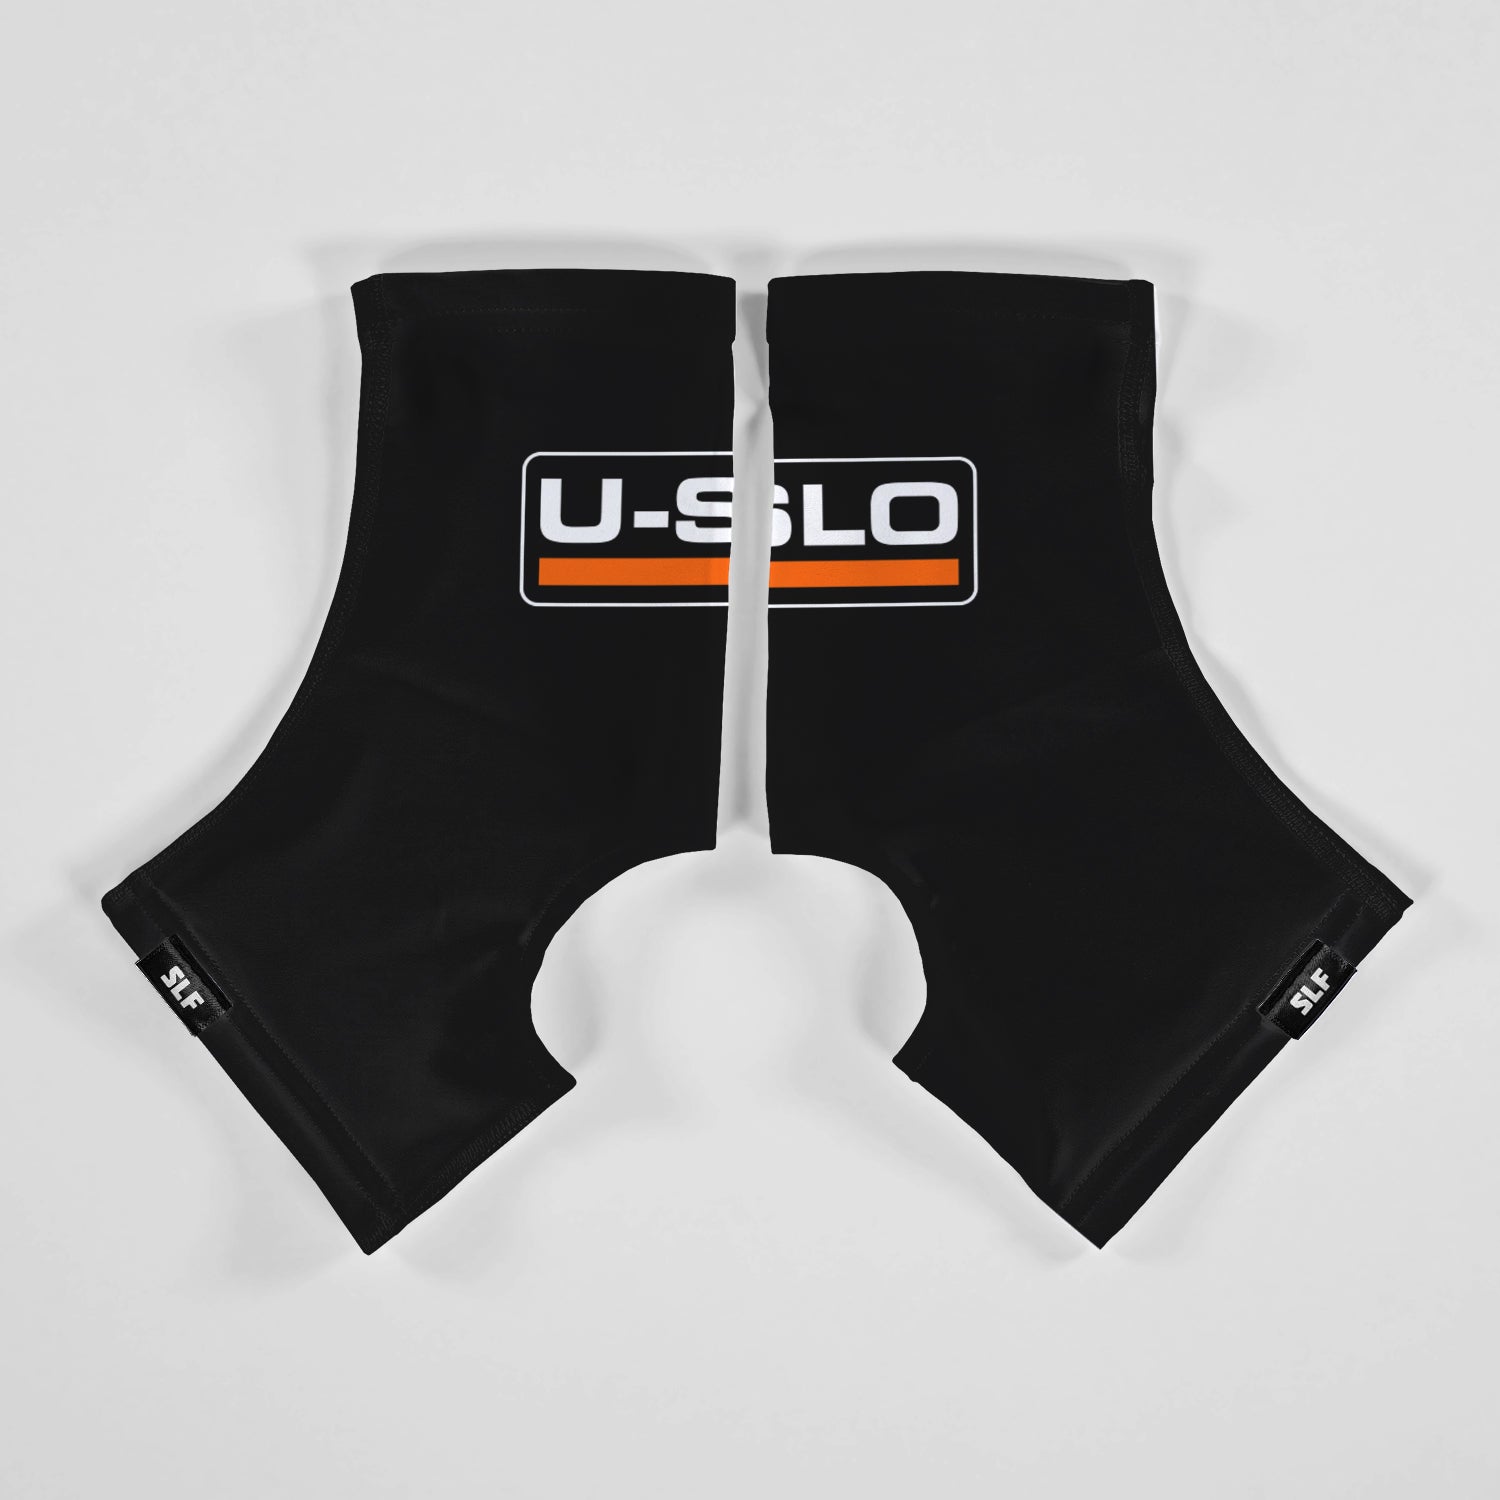 U-SLO Black Spats / Cleat Covers